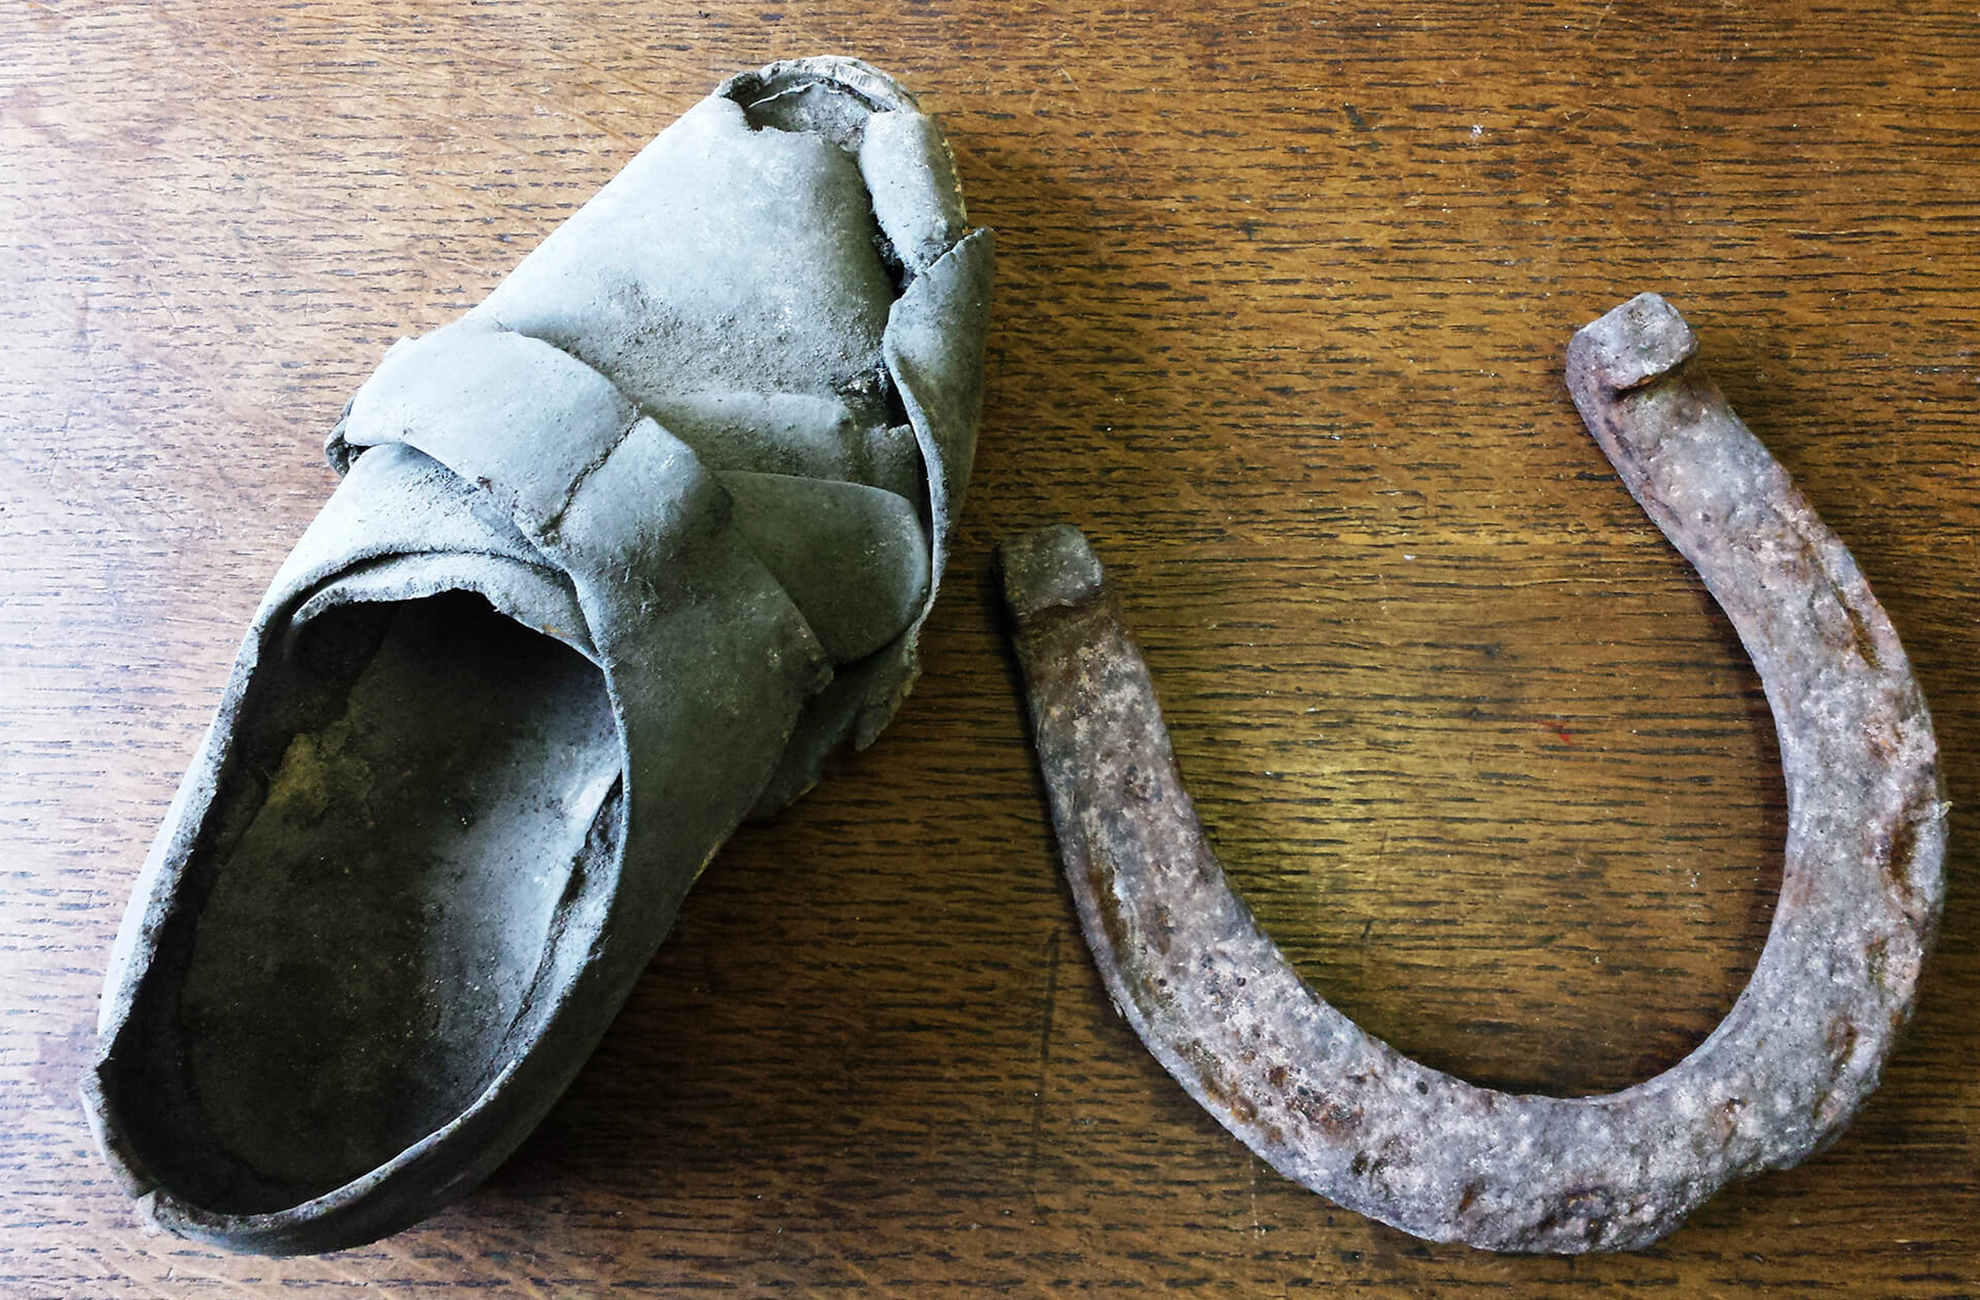 During the restoration at Combermere Abbey a horseshoe and shoe were found